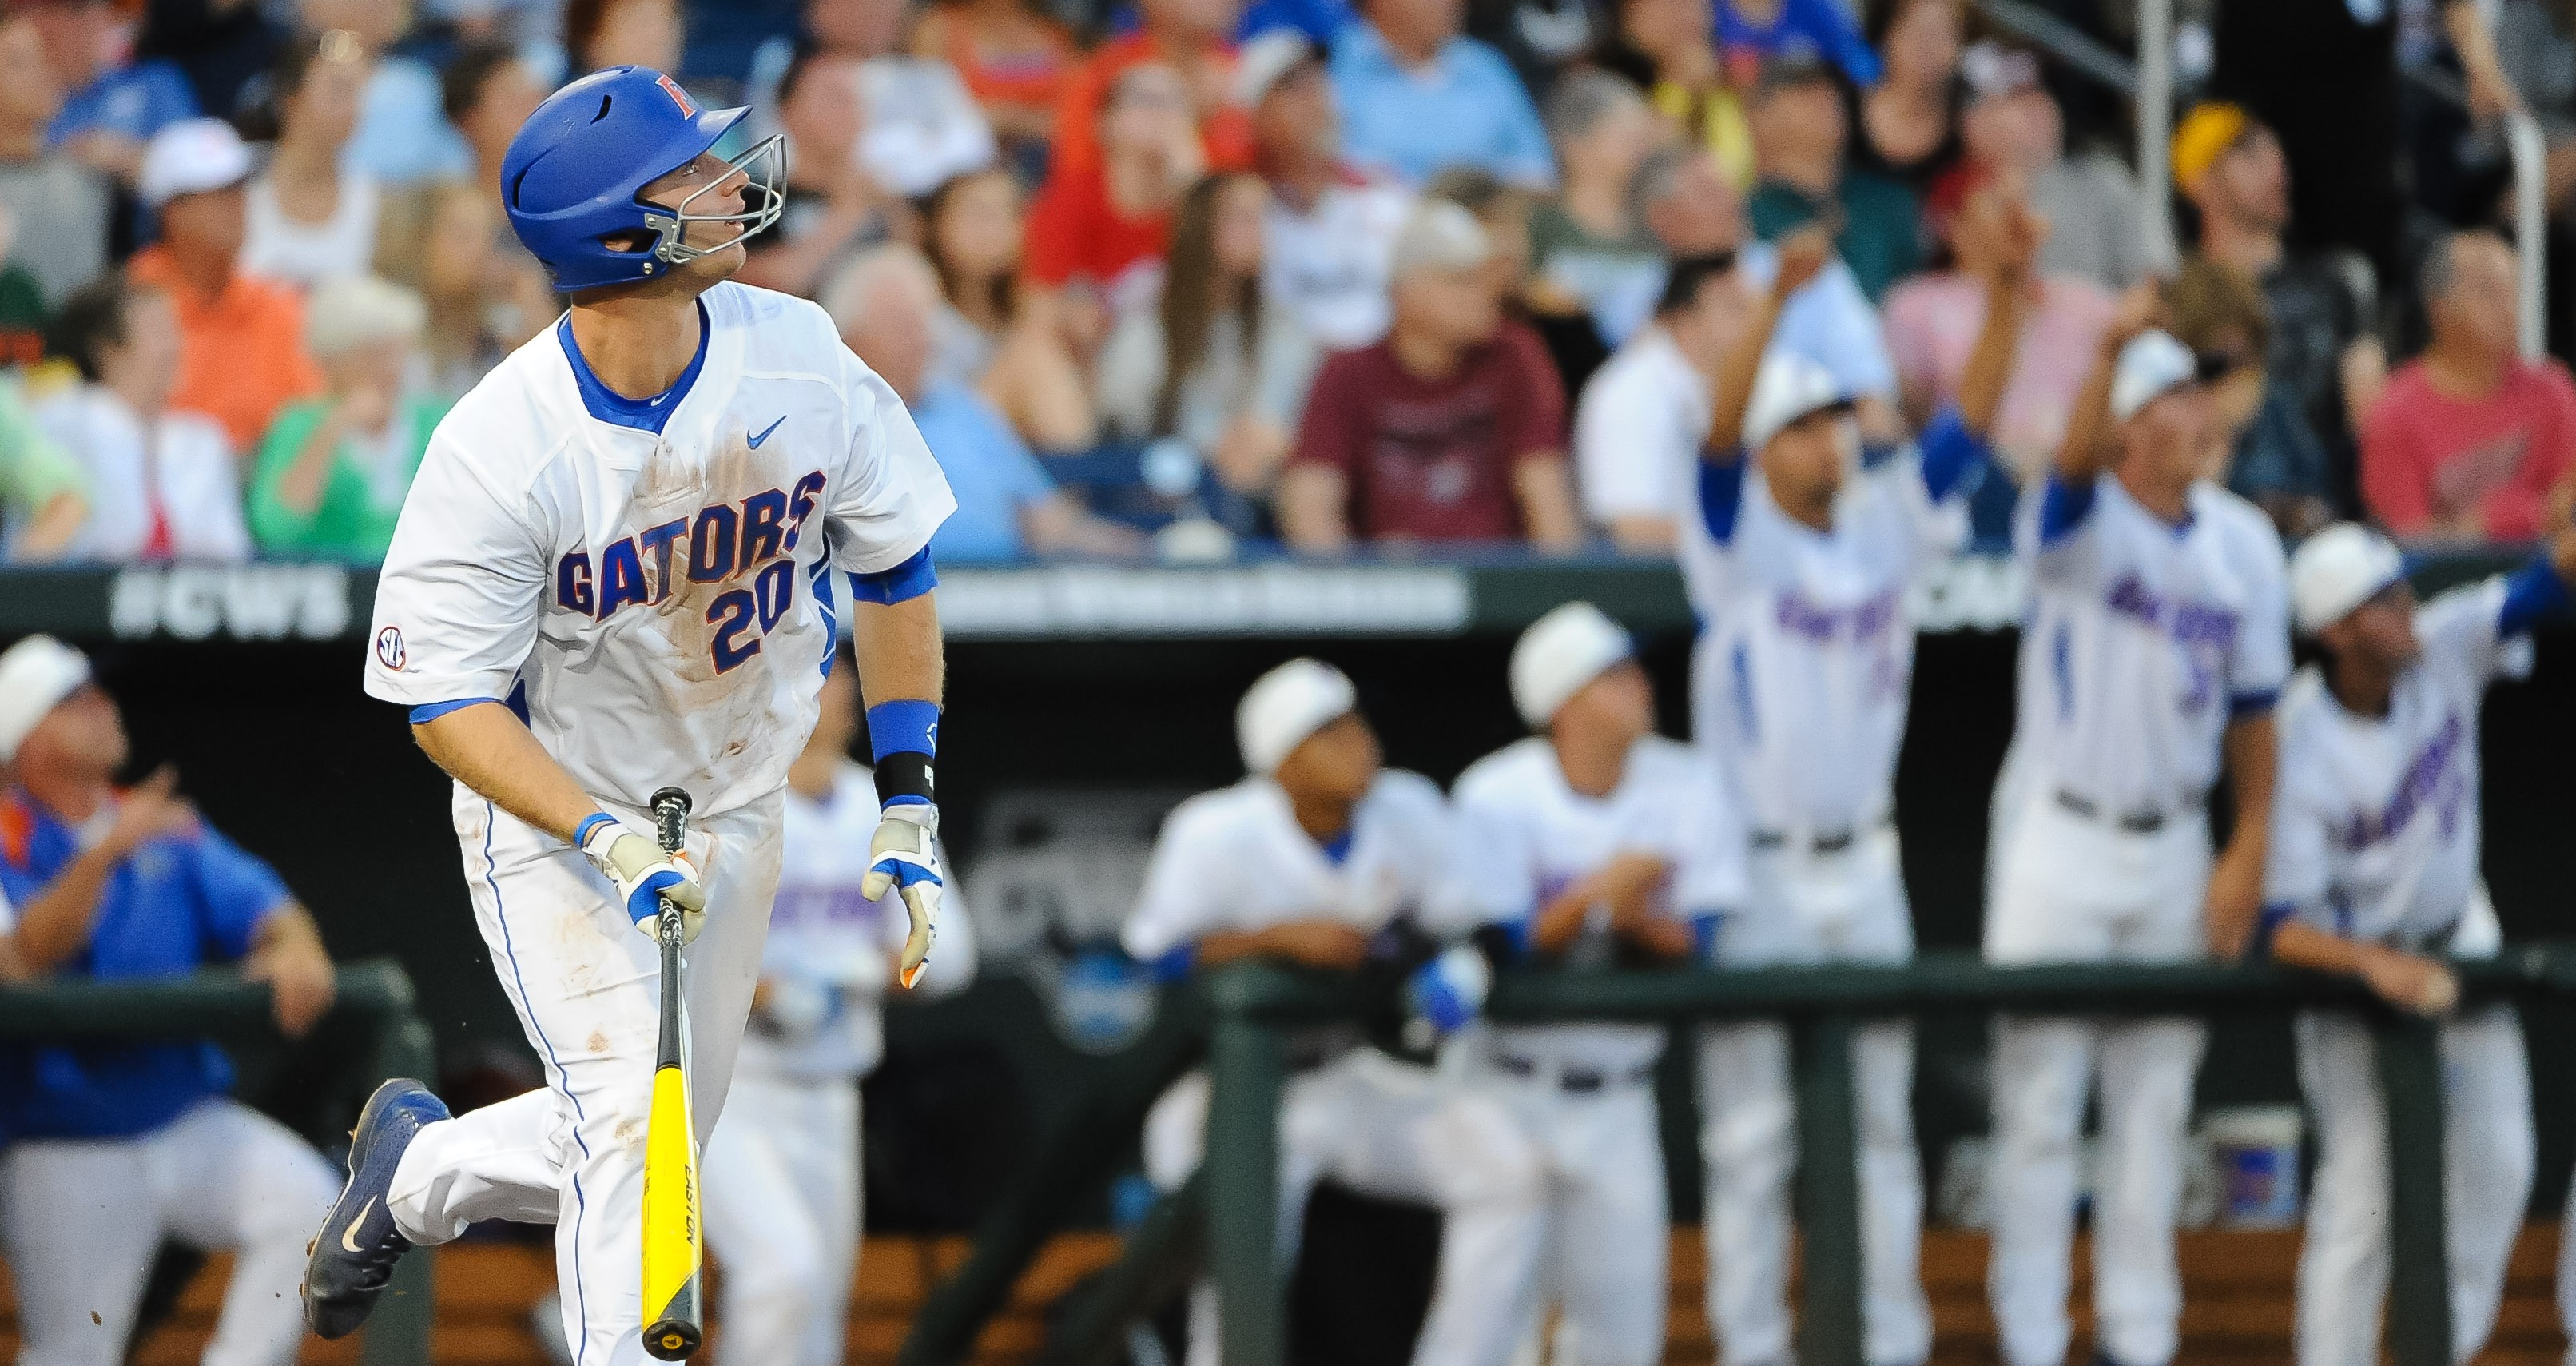 Peter Alonso's Collegiate Career Ends with a Dominating CBWS